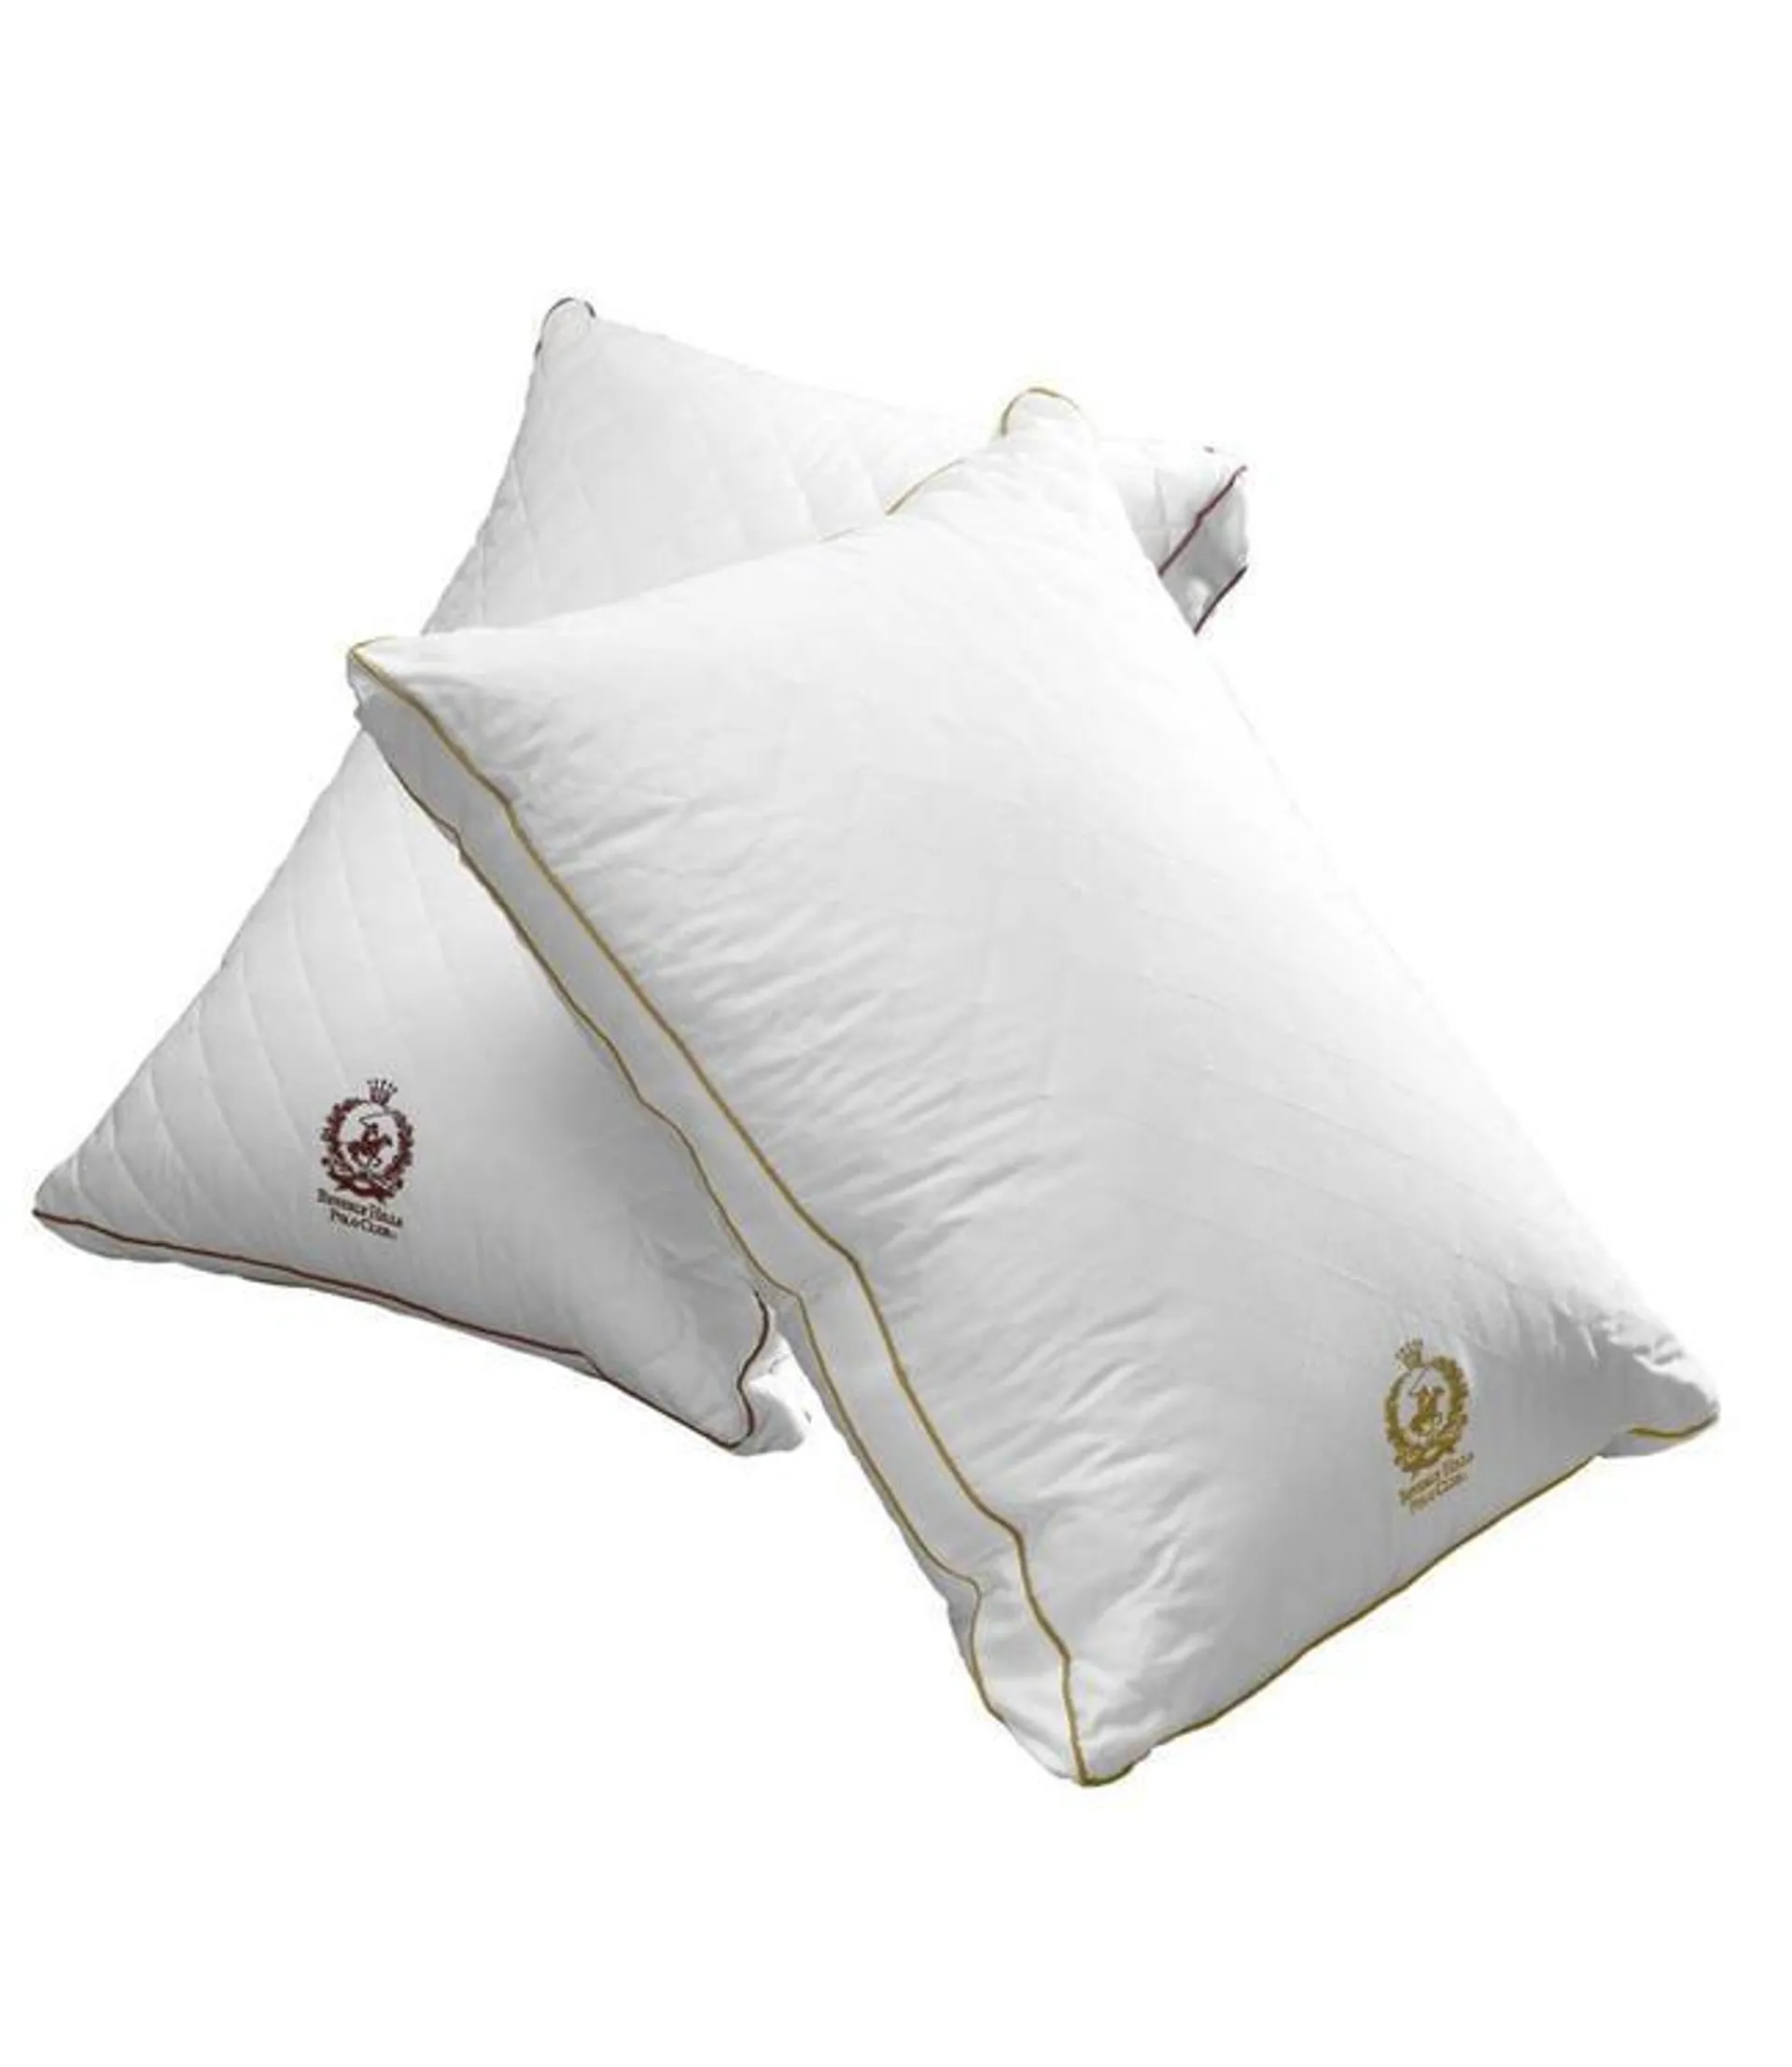 MAISON CONDELLE BEVERLY HILLS POLO CLUB PILLOW (MP10)